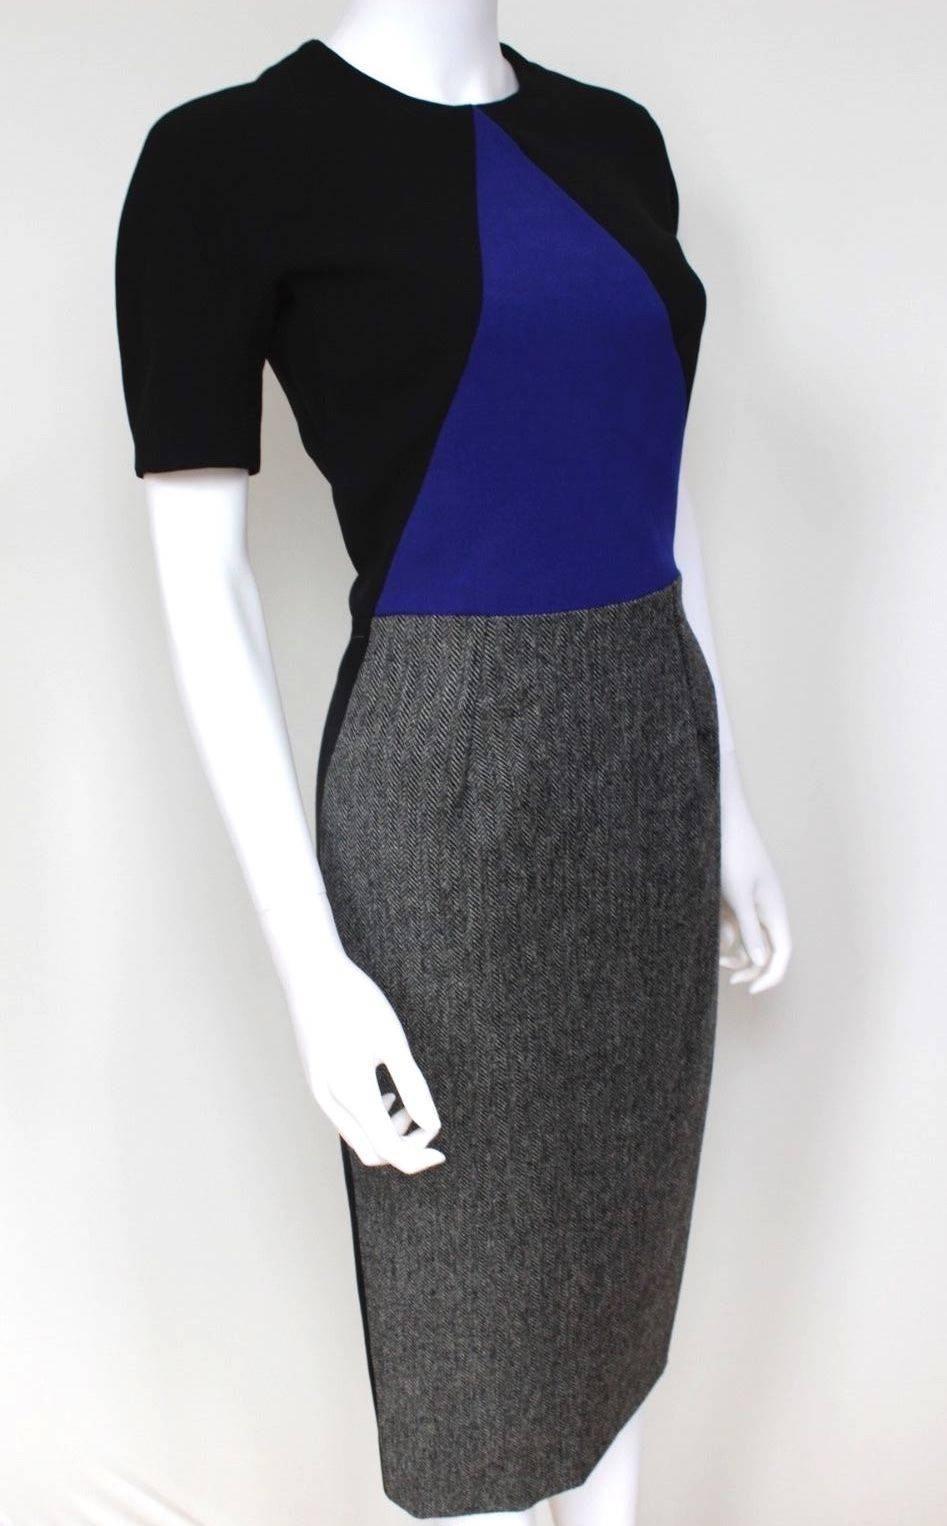 New with Tags Victoria Beckham blue triangle geometric paneled exposed zip dress UK 10-12
Victoria Beckham's black crepe dress is cut with a gray wool-tweed skirt - a striking contrast to the cobalt blue paneled body. 
Balance the elegant